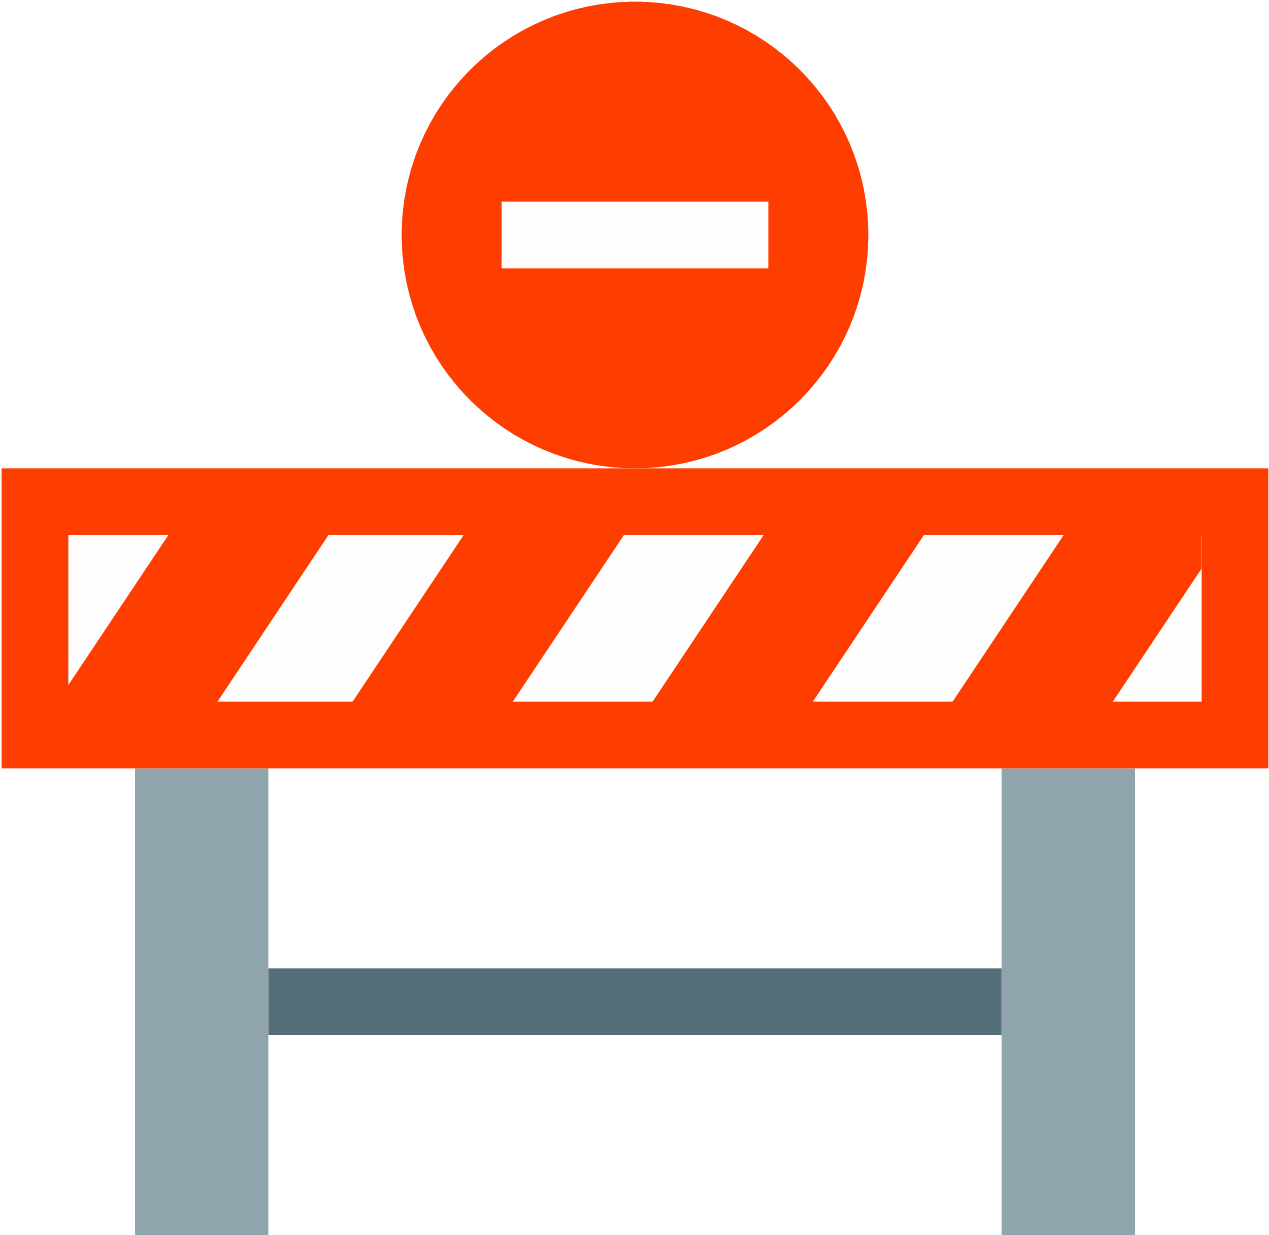 Road Barrier Sign Icon PNG image